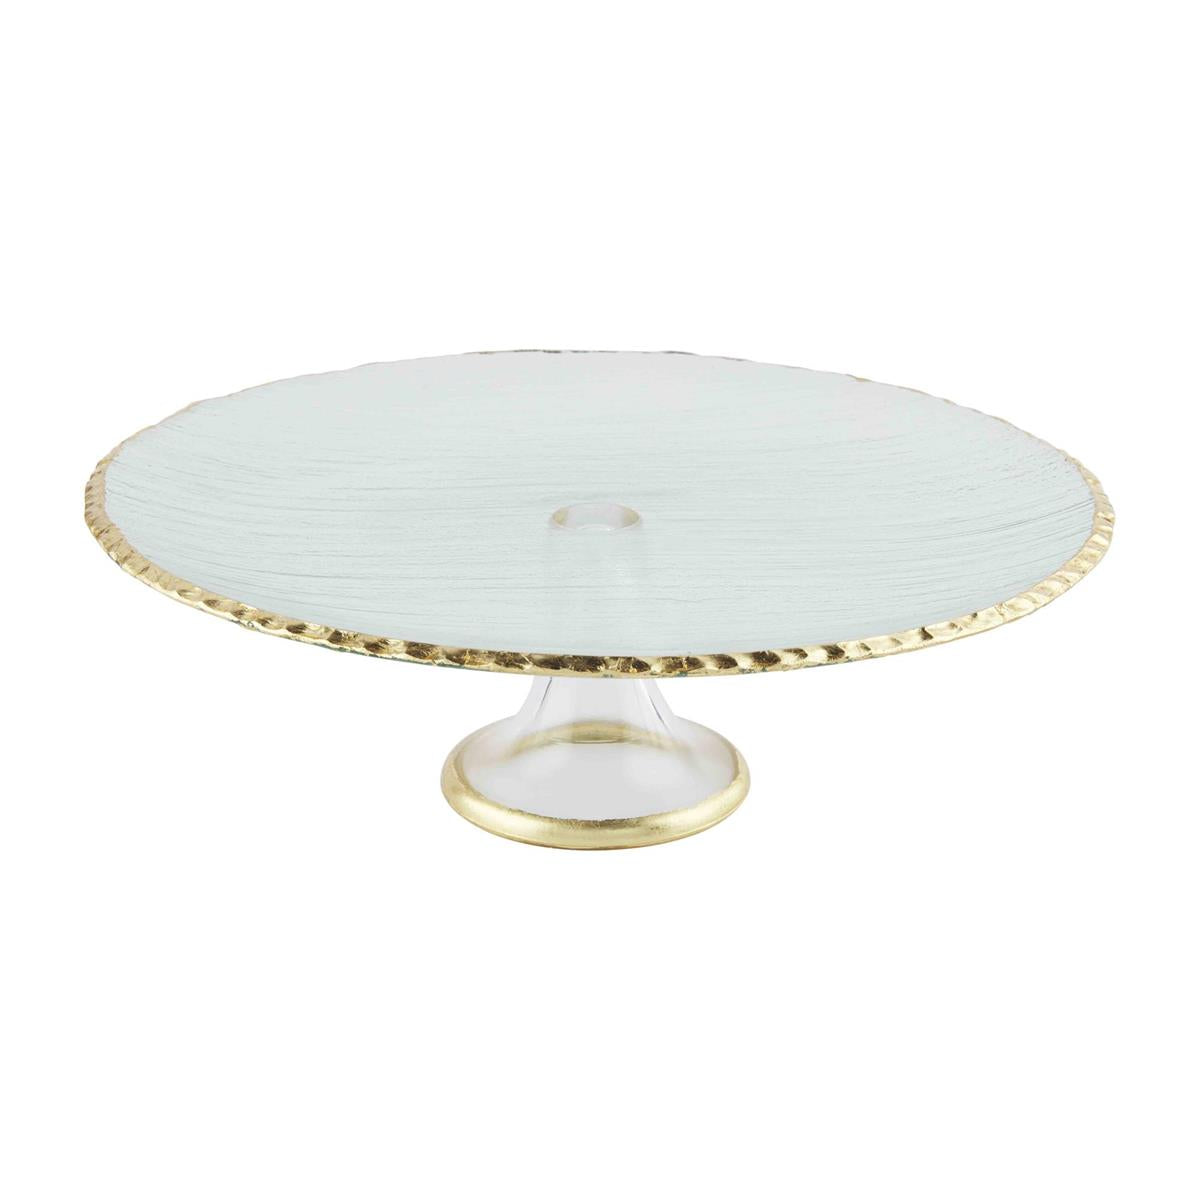 glass cake plate with gold rim on white background.